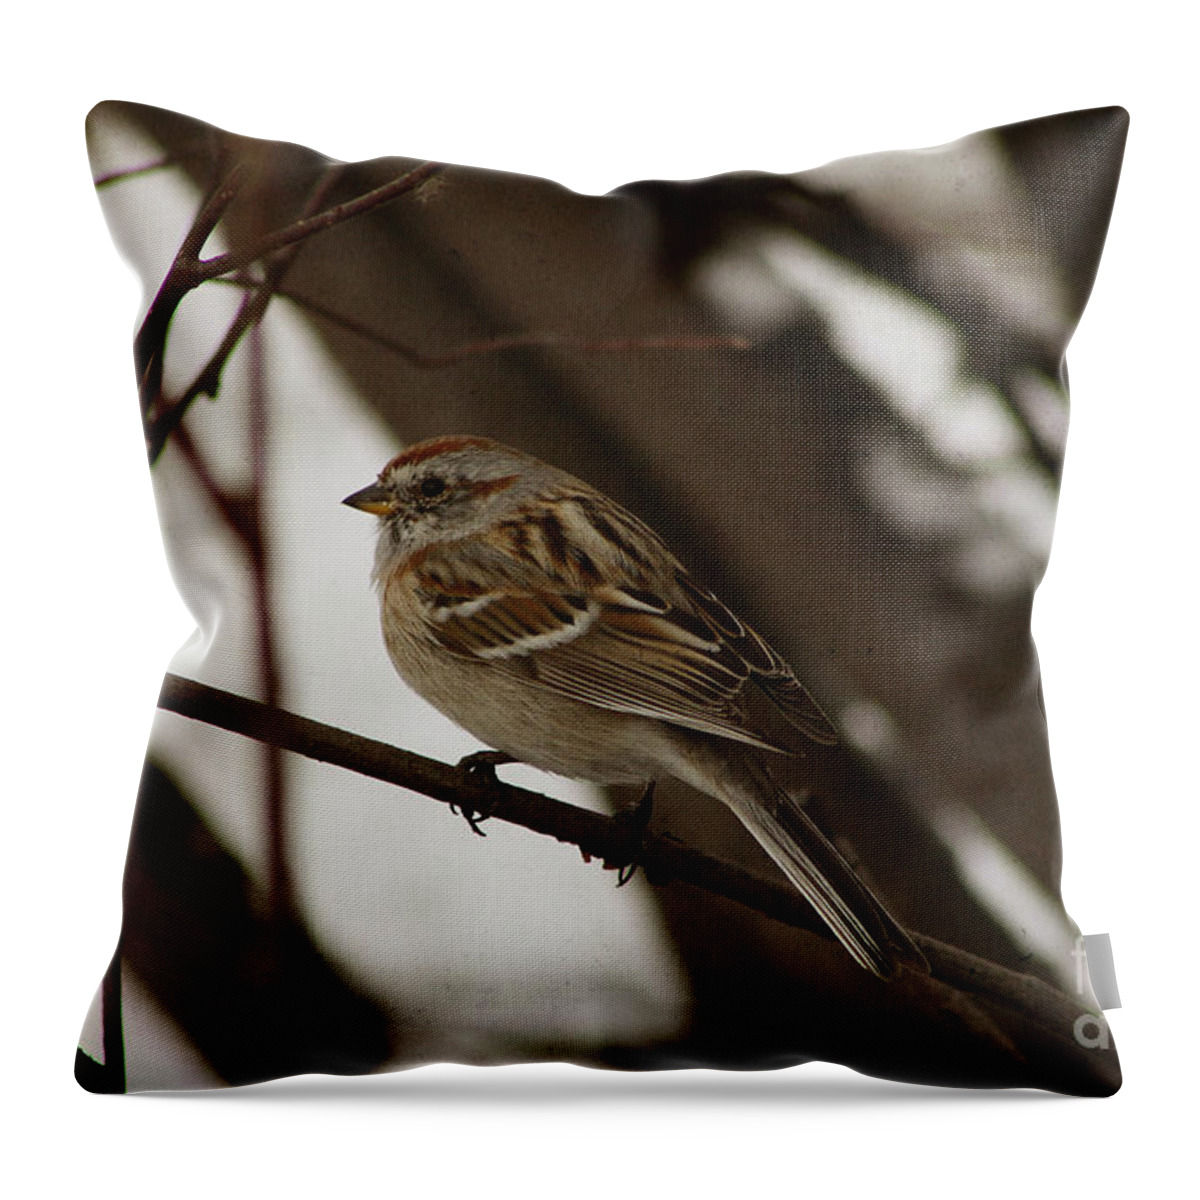 Bird Throw Pillow featuring the photograph American Tree Sparrow by Alyce Taylor